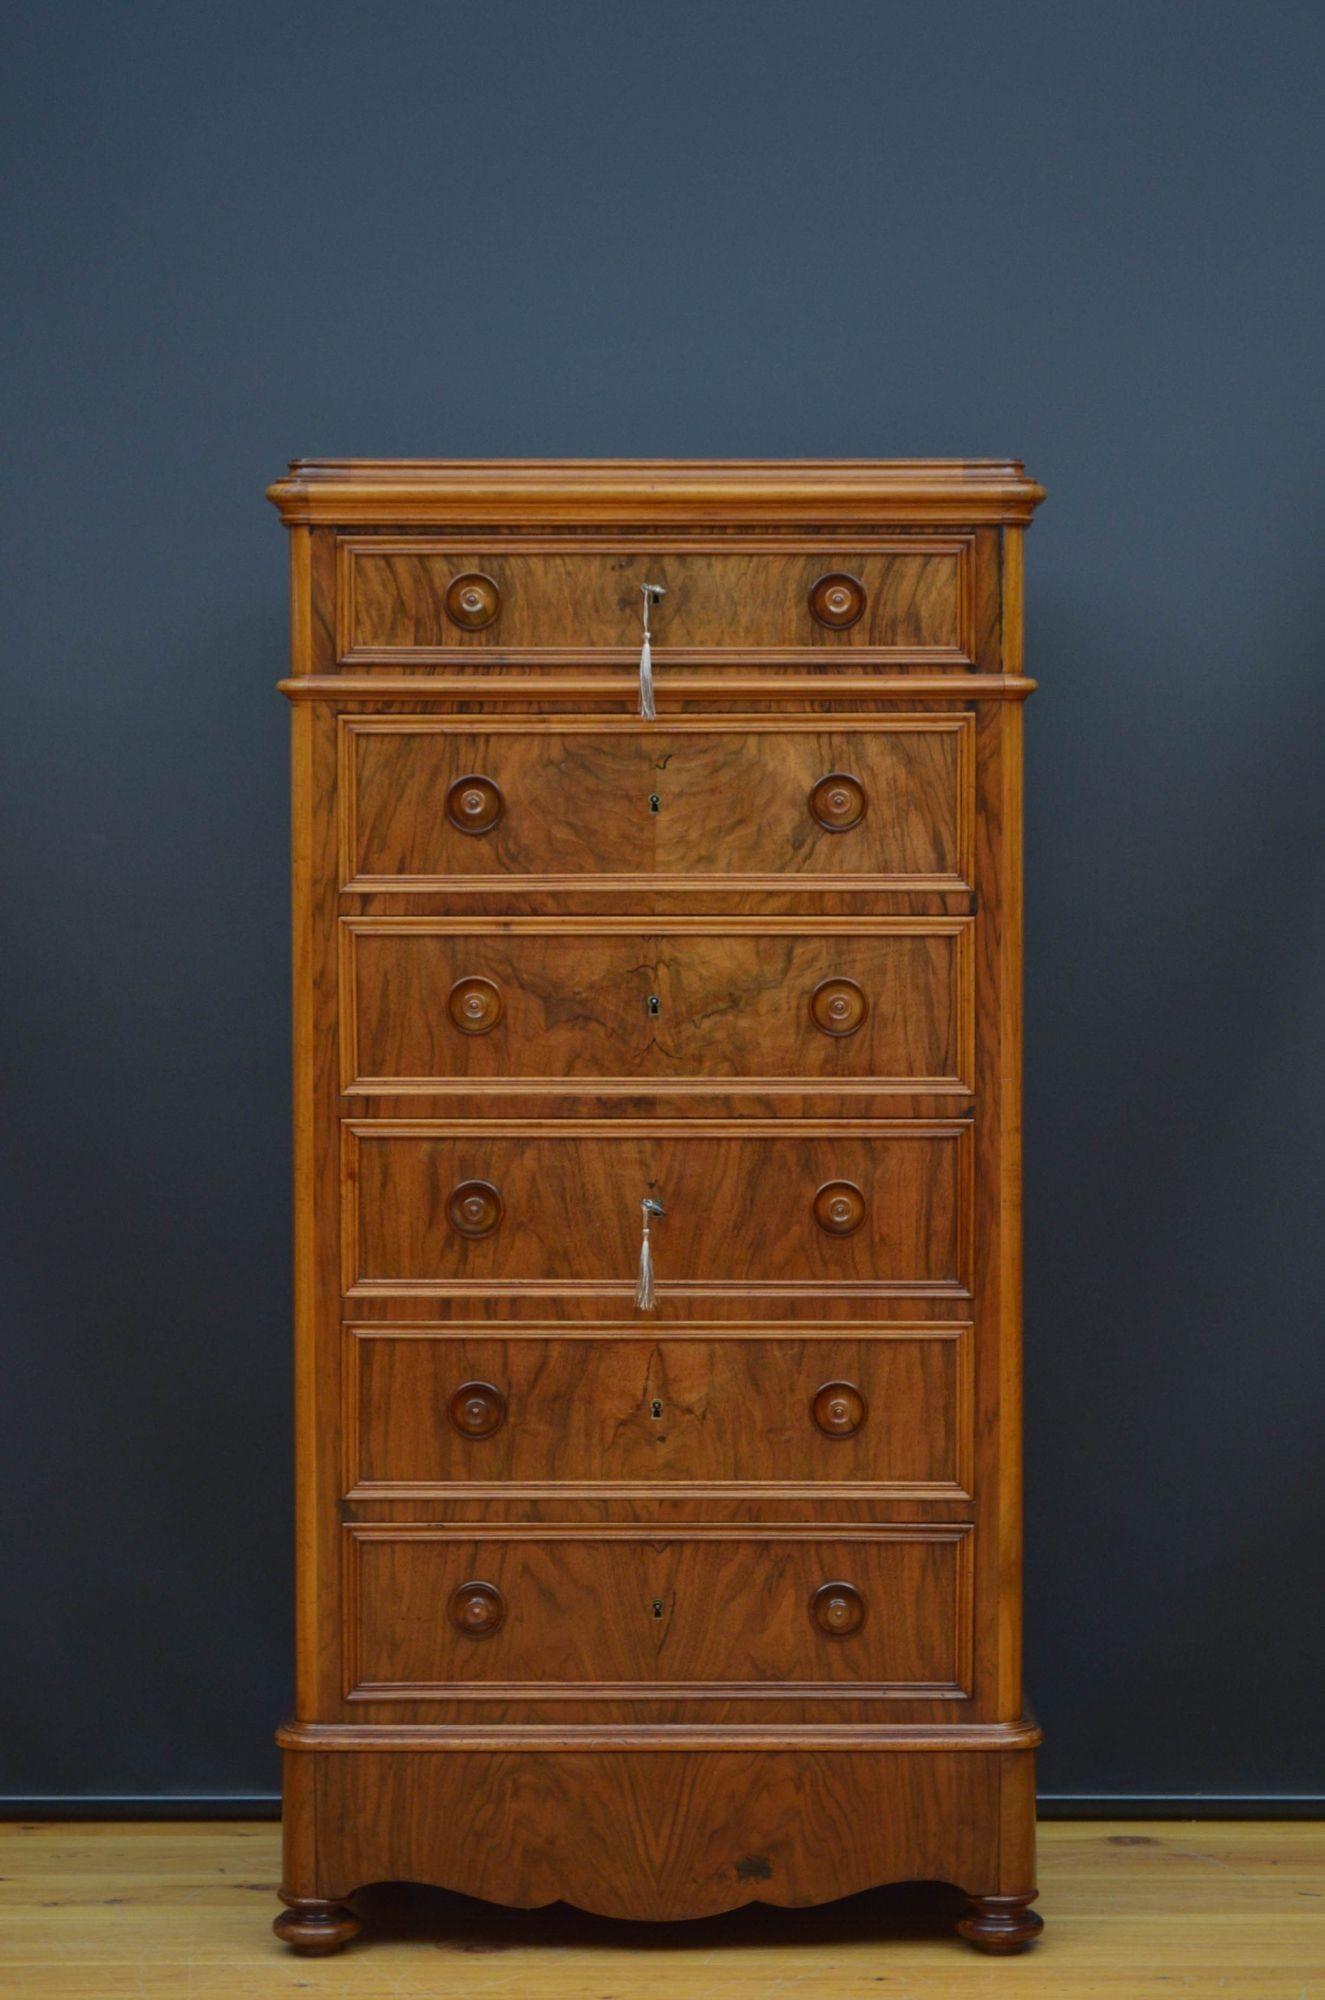 Sn5471 Fine quality, tall and slim chest of drawers in figured walnut, having figured walnut top with moulded edge and six graduated oak lined and moulded drawers, all fitted with original turned knobs, original working locks and two keys above